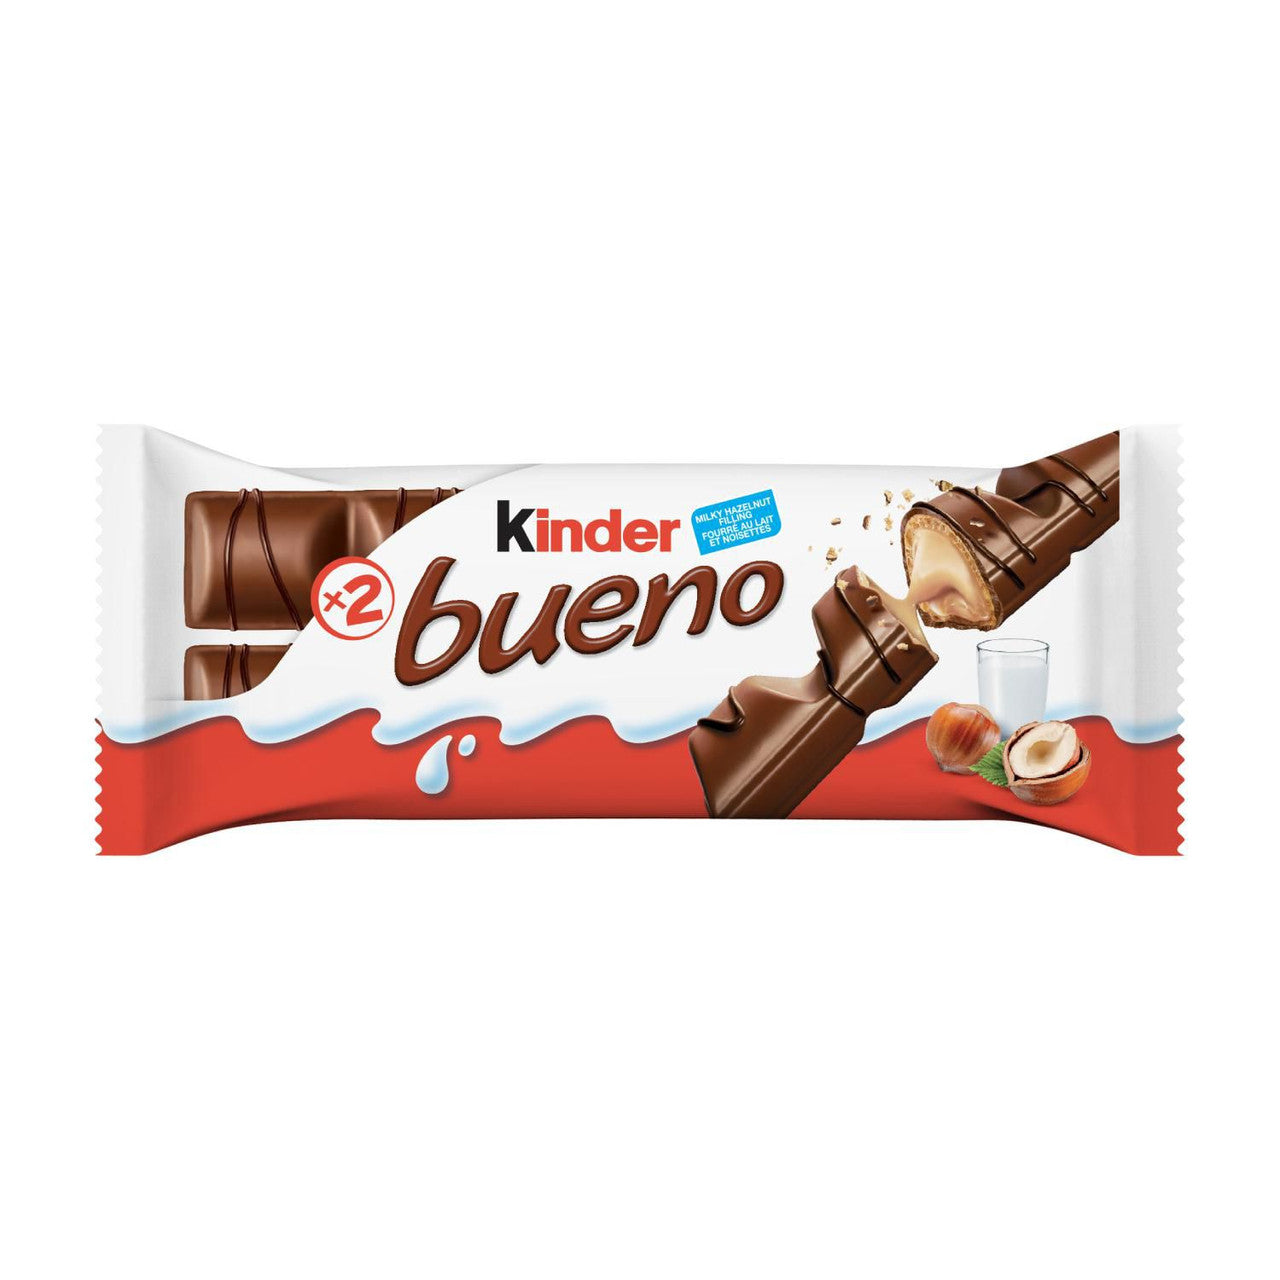 Kinder Bueno Hazelnut Milk Chocolate, 2 Bars per Pack, 43g/1.5 oz. 1 Pack {Imported from Canada}